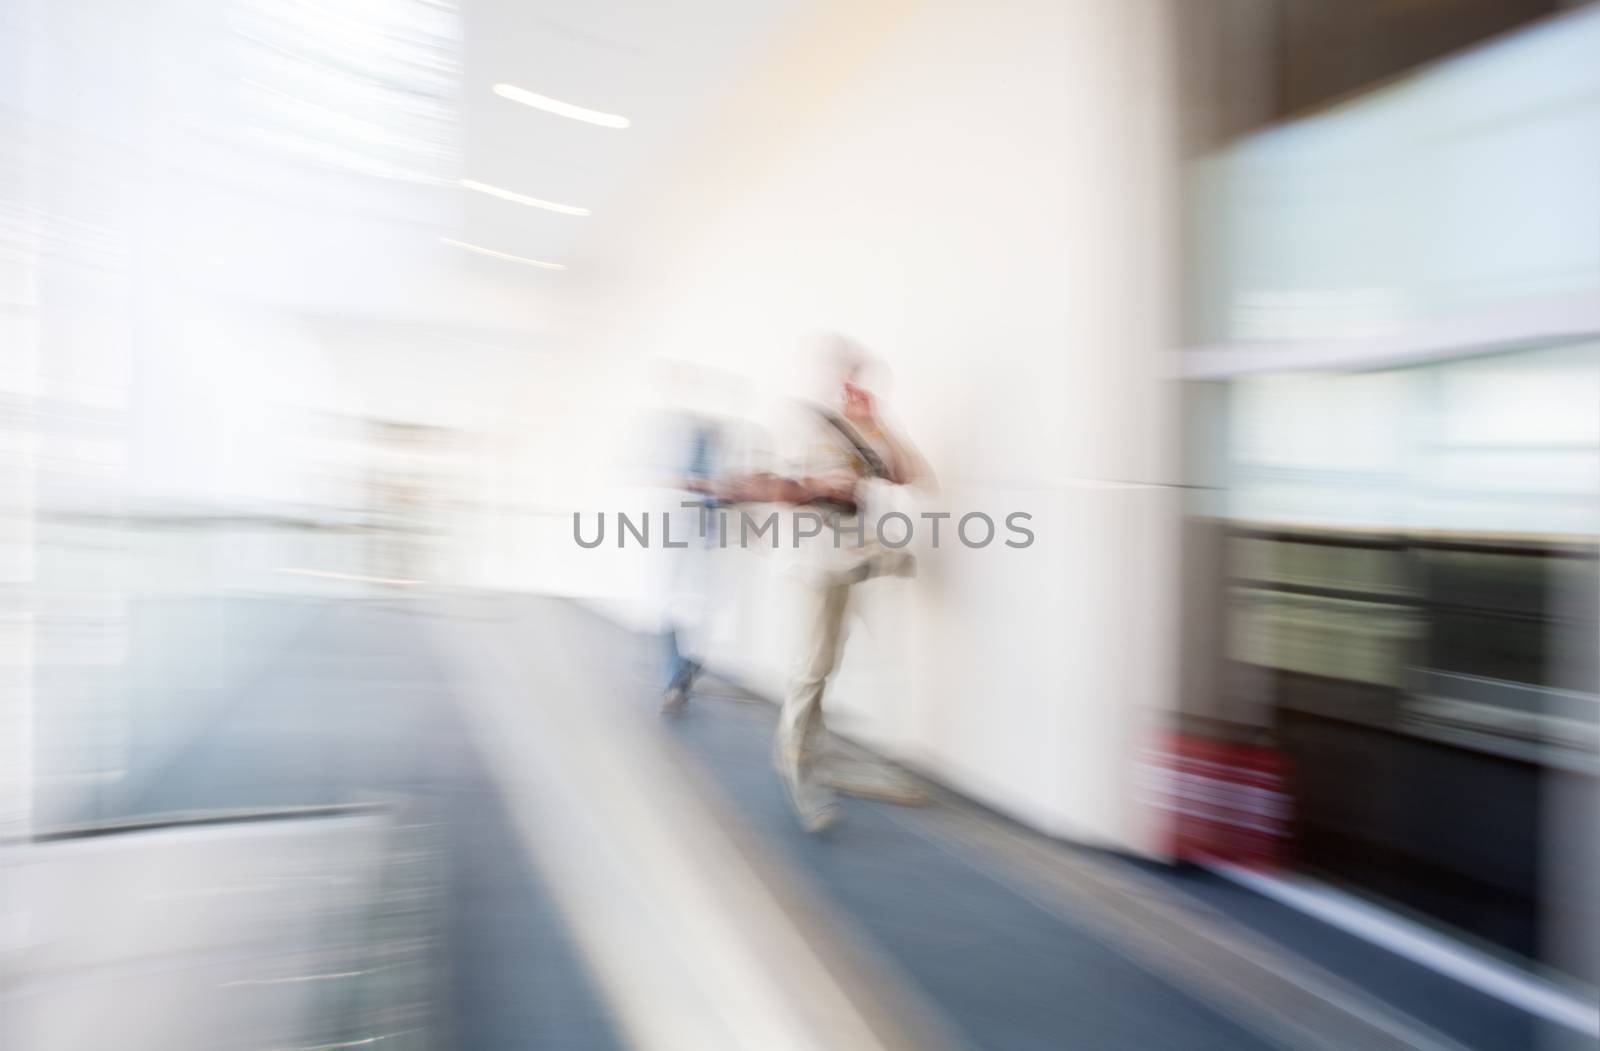 A motion blurred background image of an interior of hospital, airport or other with some human figures.